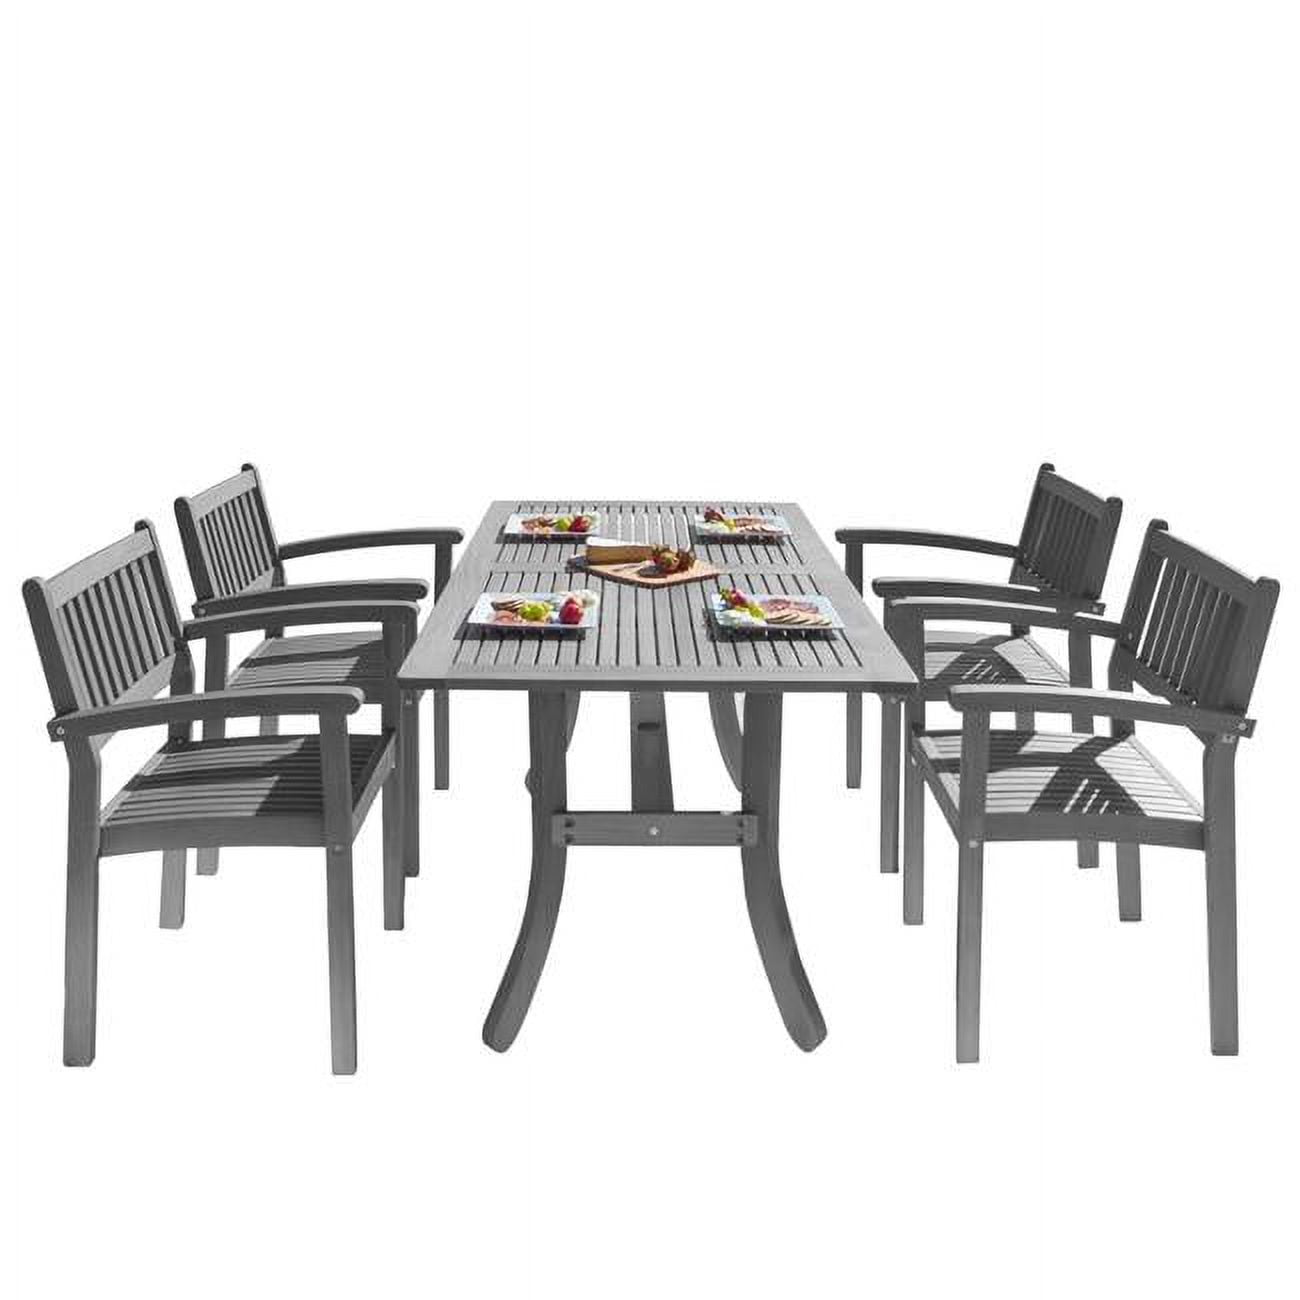 Outdoor Patio Hand-scraped Wood 5-piece Dining Set With Stacking Chairs - V1300set13